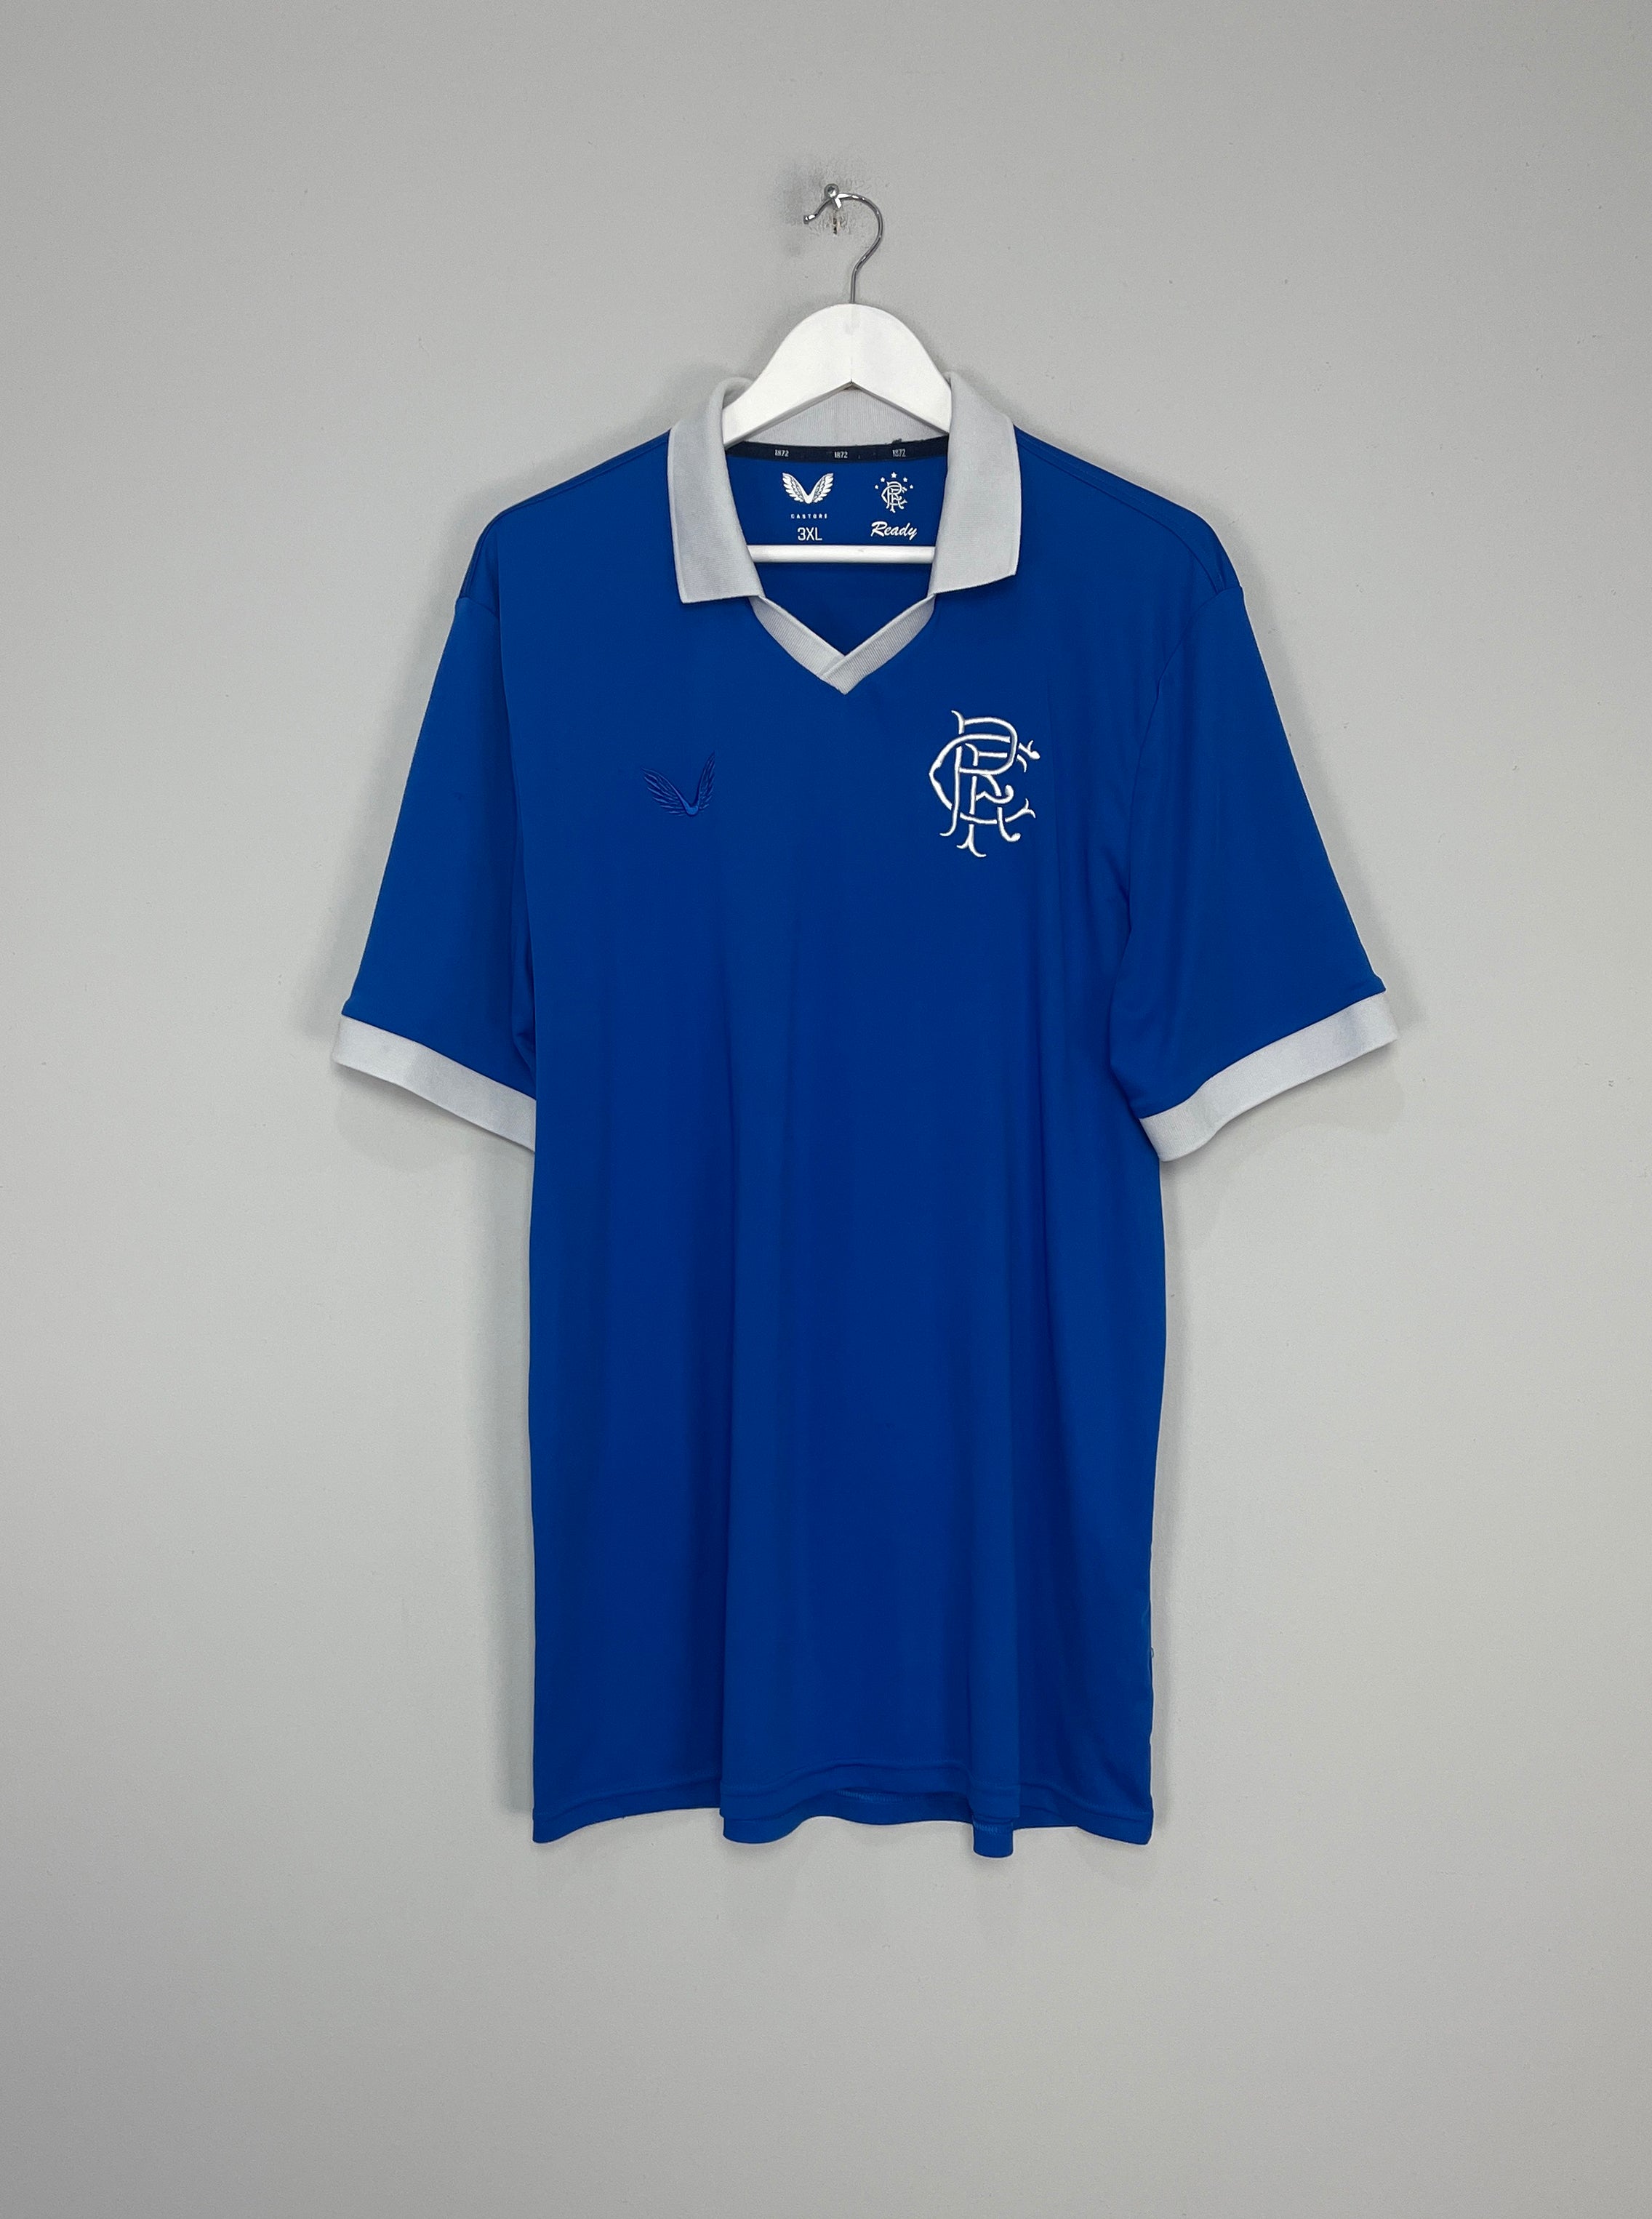 The Rangers Rumoured 2020-21 Kits by Castore - Football Shirt Culture -  Latest Football Kit News and More